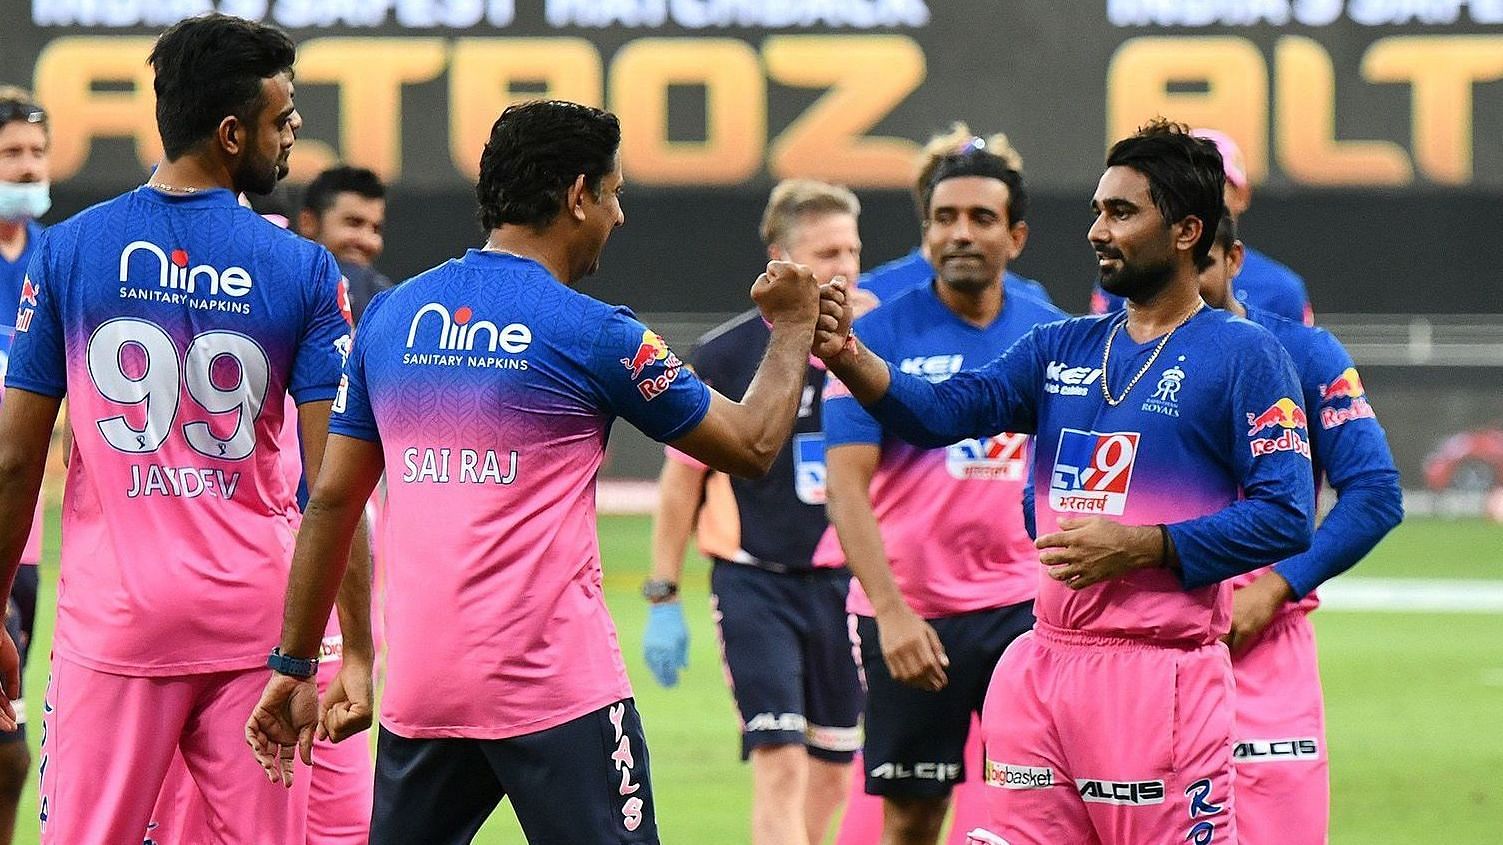 Rajasthan Royals scored 69 runs in the last 29 balls of their innings to win against Sunrisers Hyderabad after four successive losses